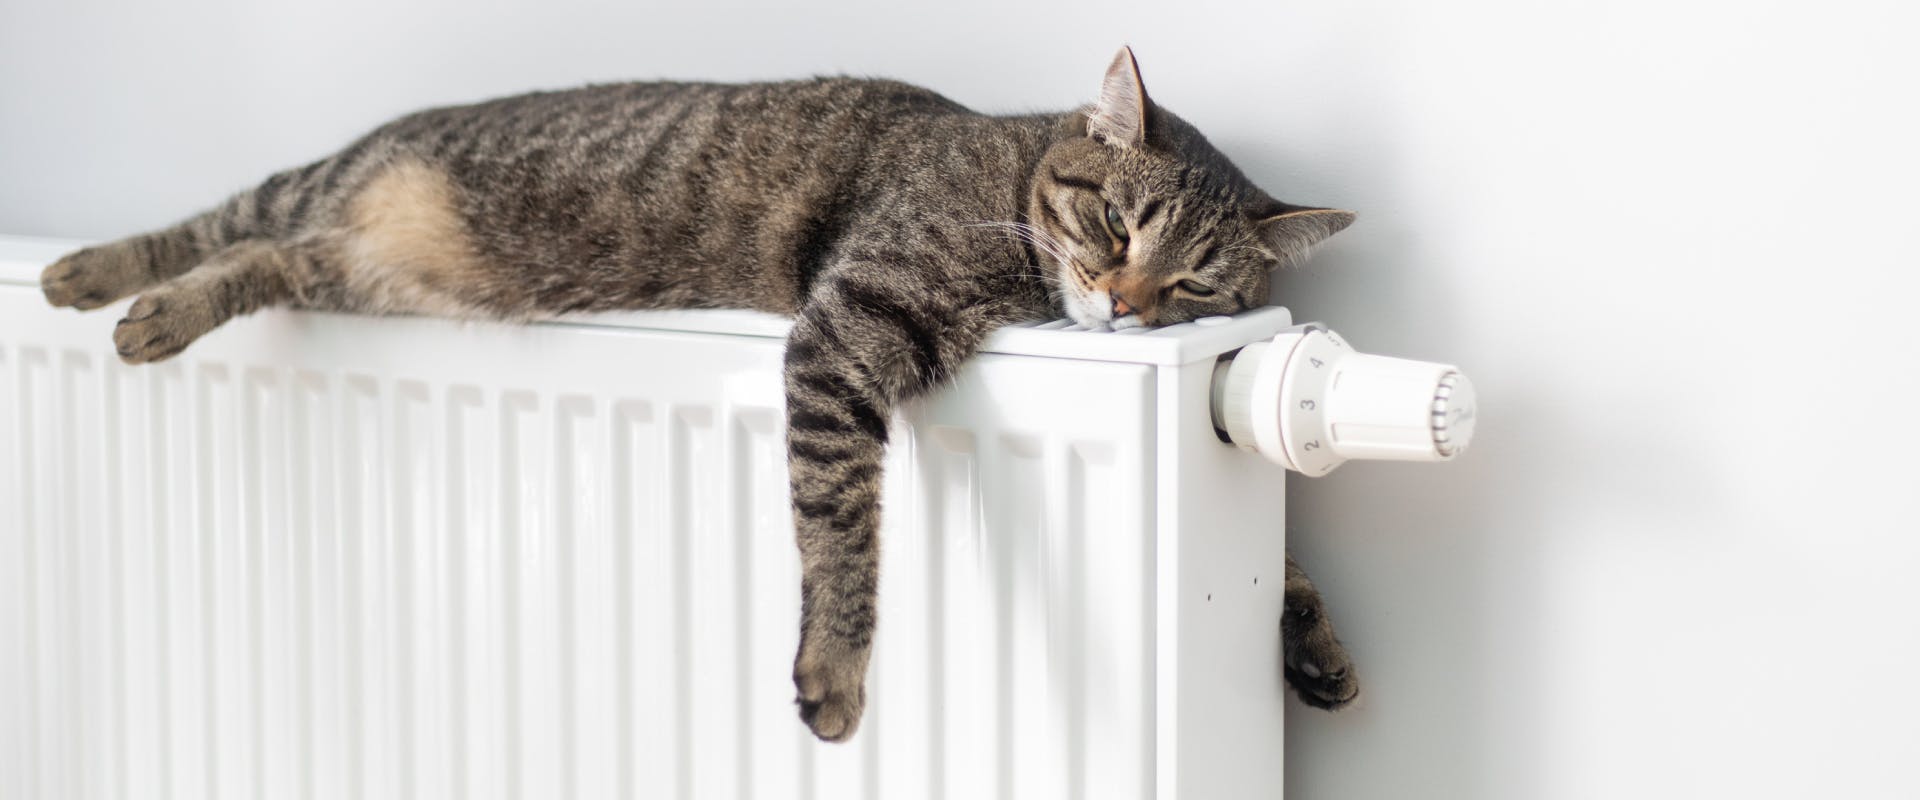 A cat stretches out on a radiator.